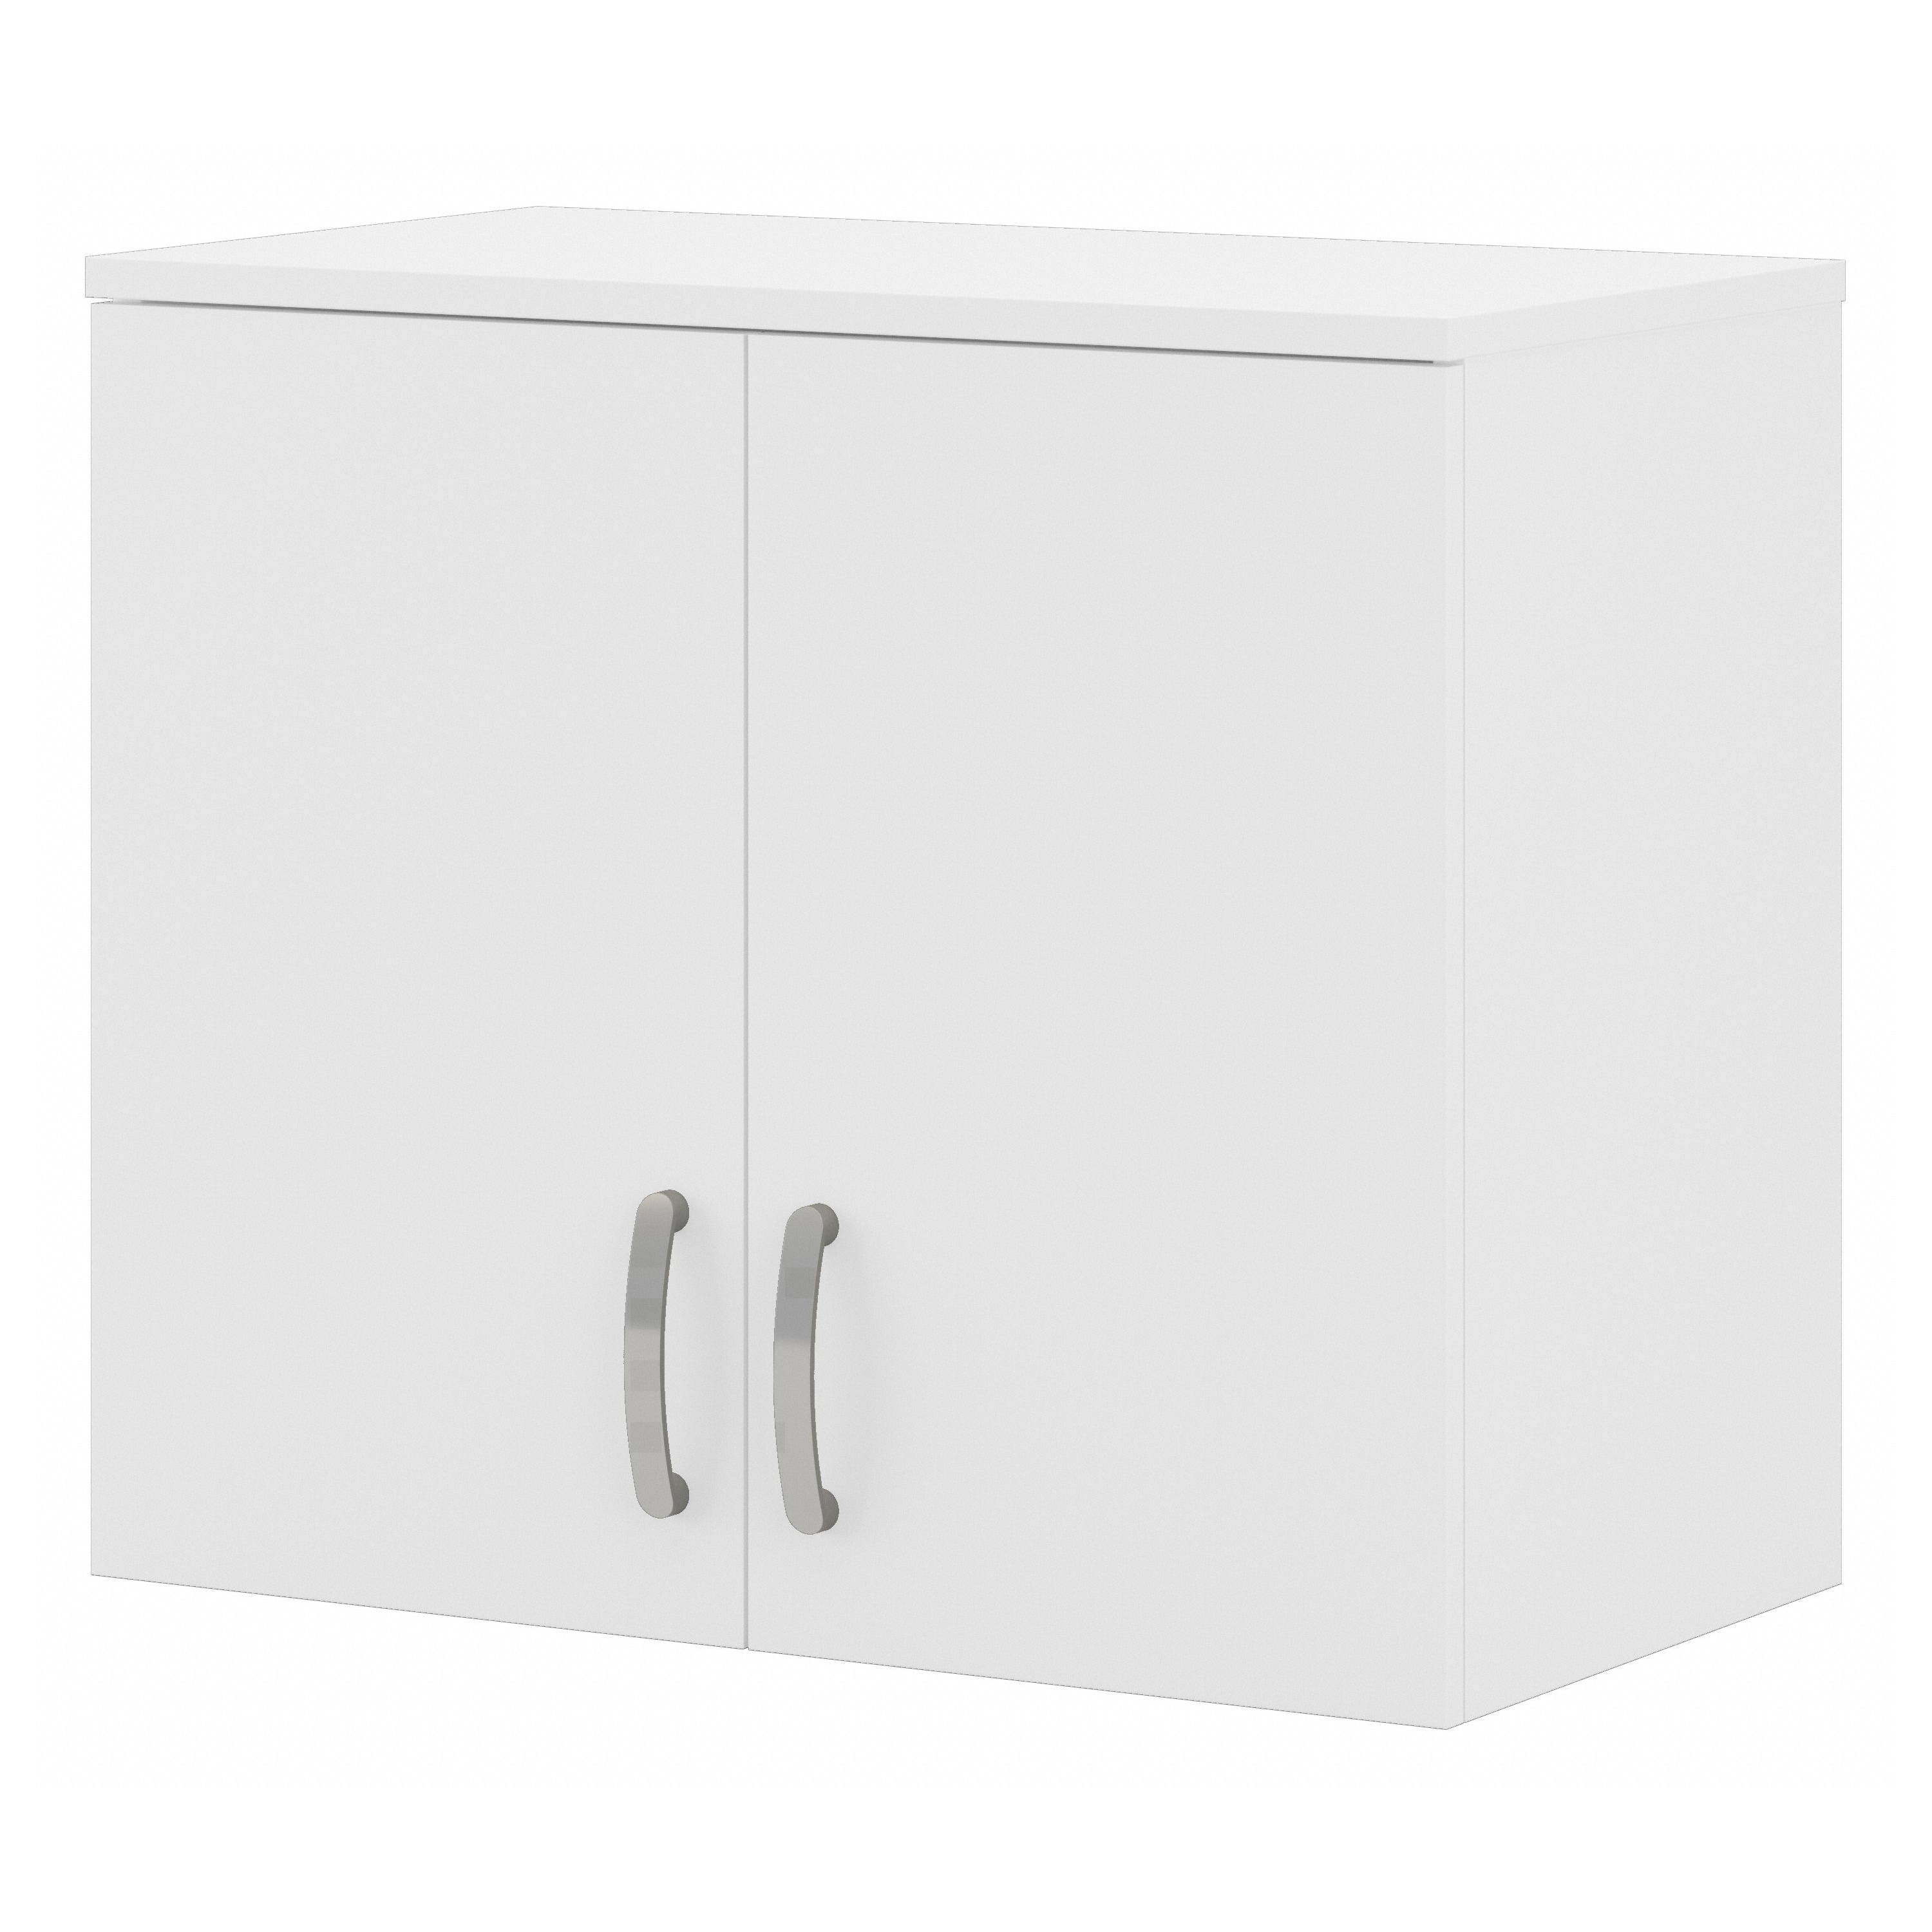 Shop Bush Business Furniture Universal Closet Wall Cabinet with Doors and Shelves 02 CLS428WH-Z #color_white